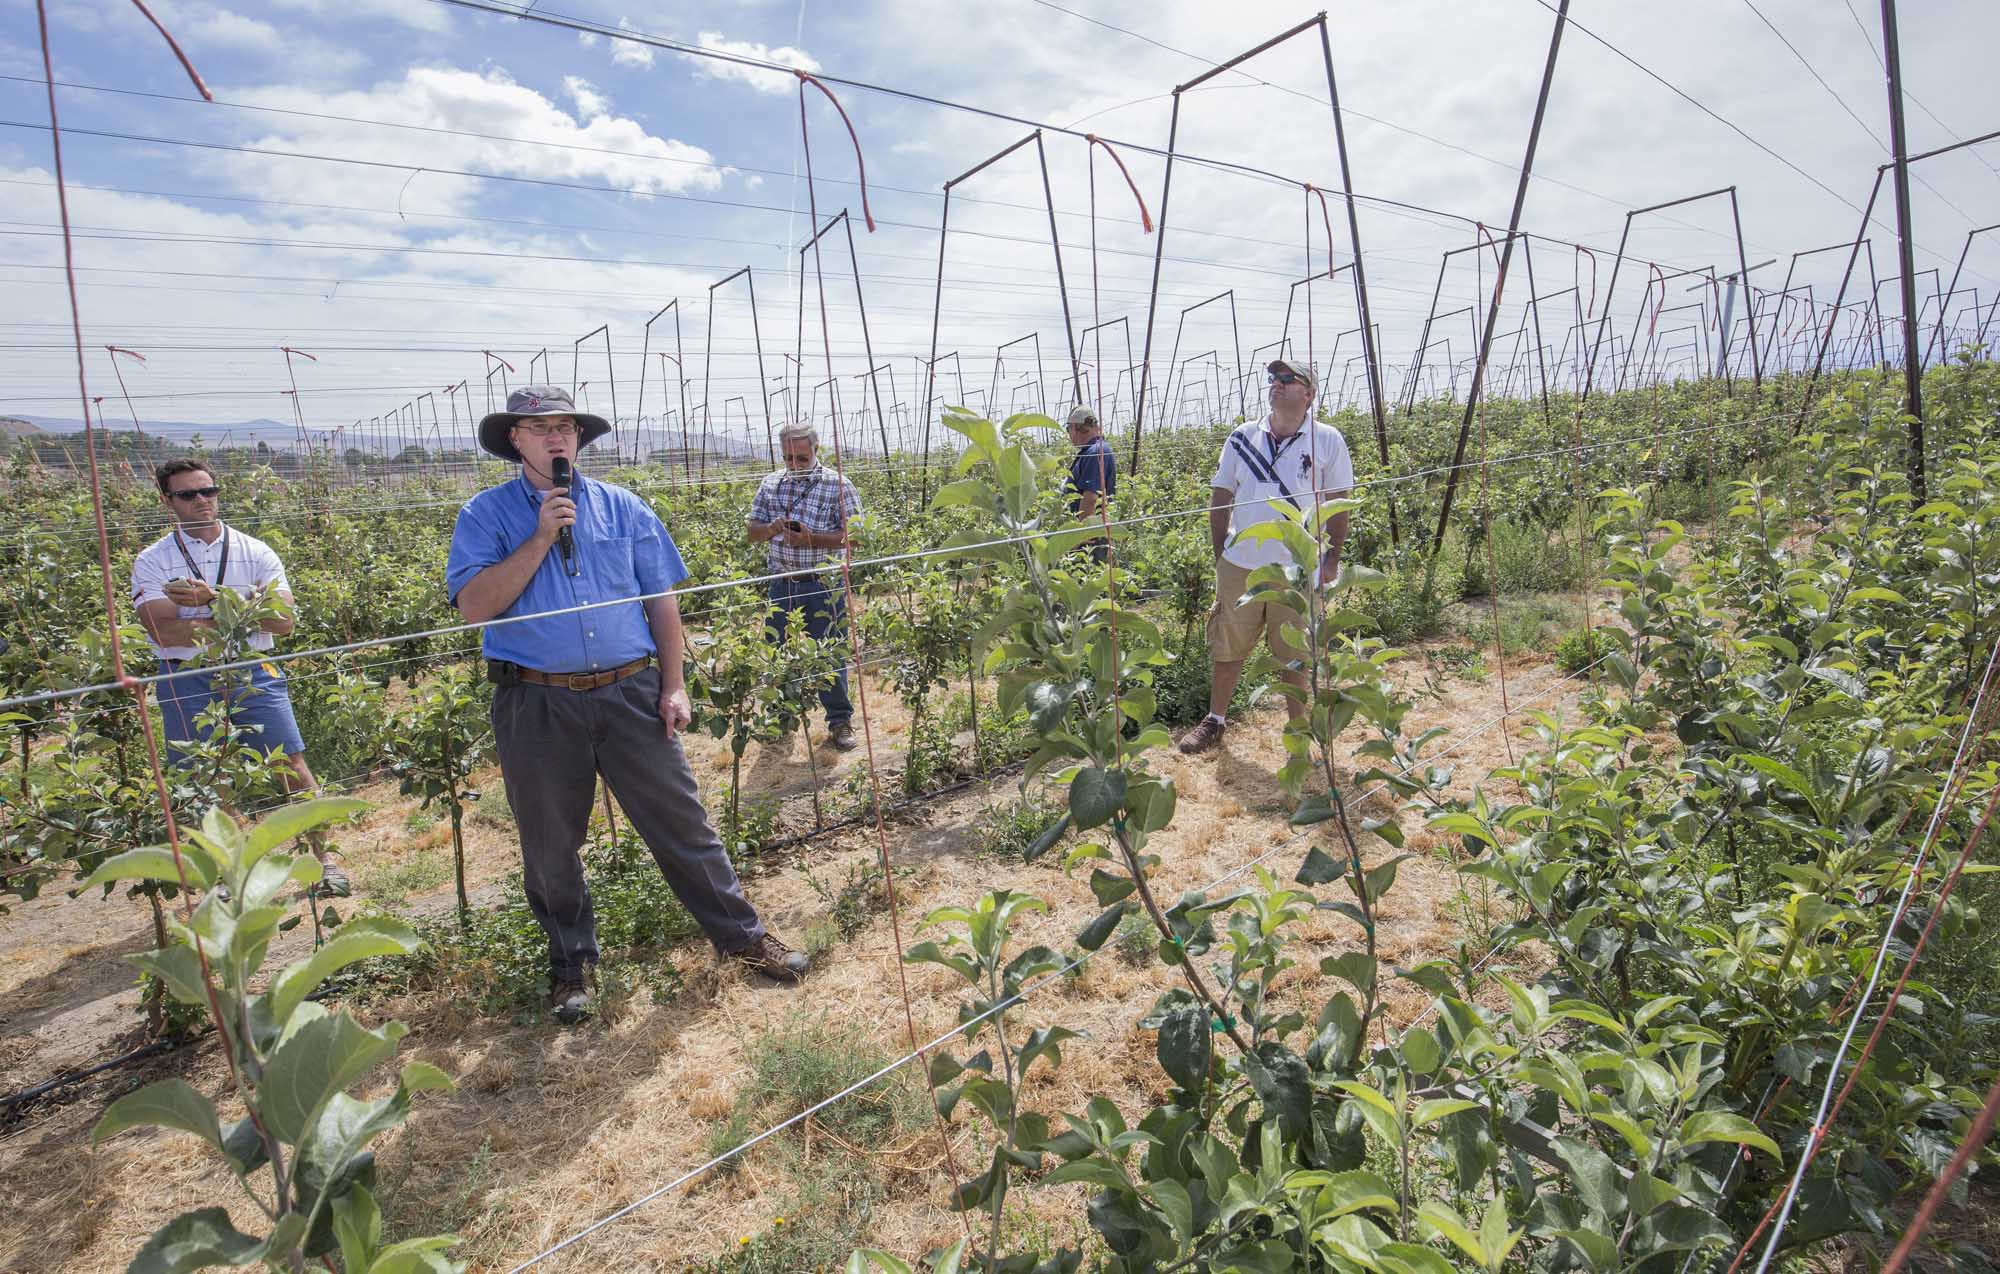 Jason Matson talks with IFTA tour members at one of his orchards in Selah, Washington on the second day of the tour on July 16, 2015. (TJ Mullinax/Good Fruit Grower)